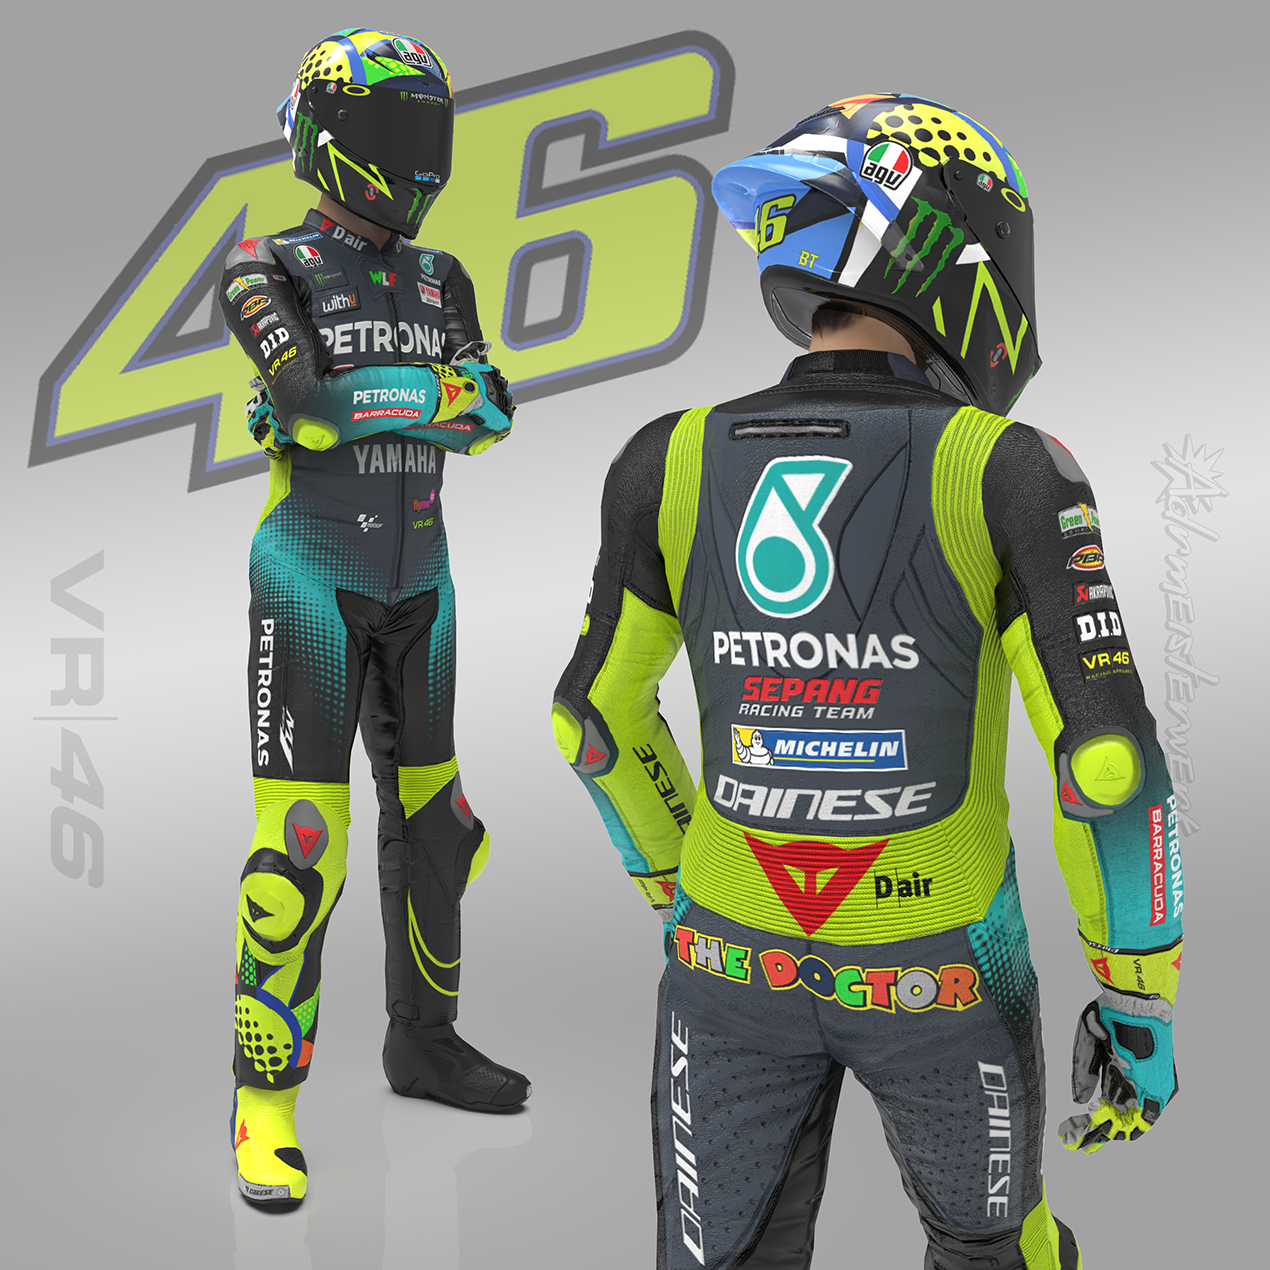 vr46 new 212.png